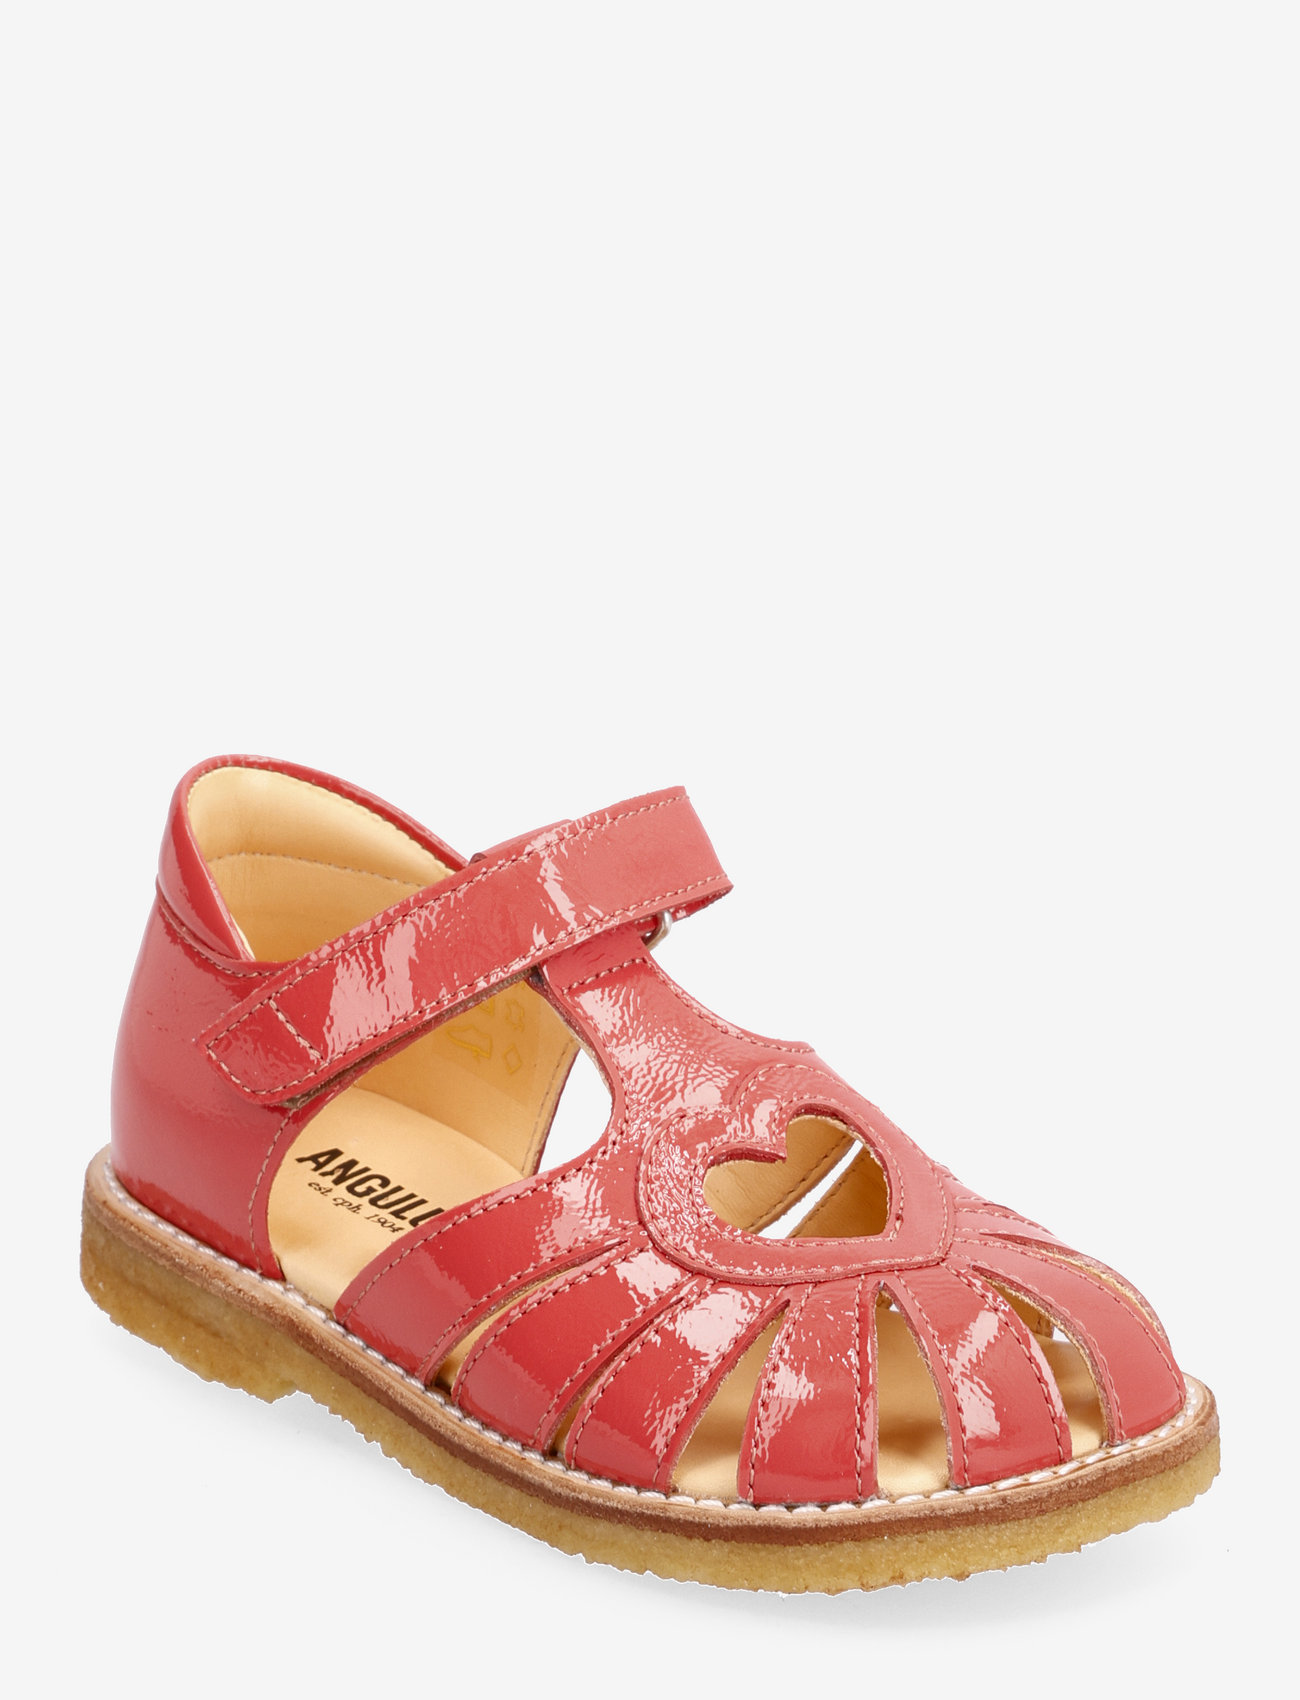 ANGULUS - Sandals - flat - closed toe - - sommerschnäppchen - 1318 coral - 0